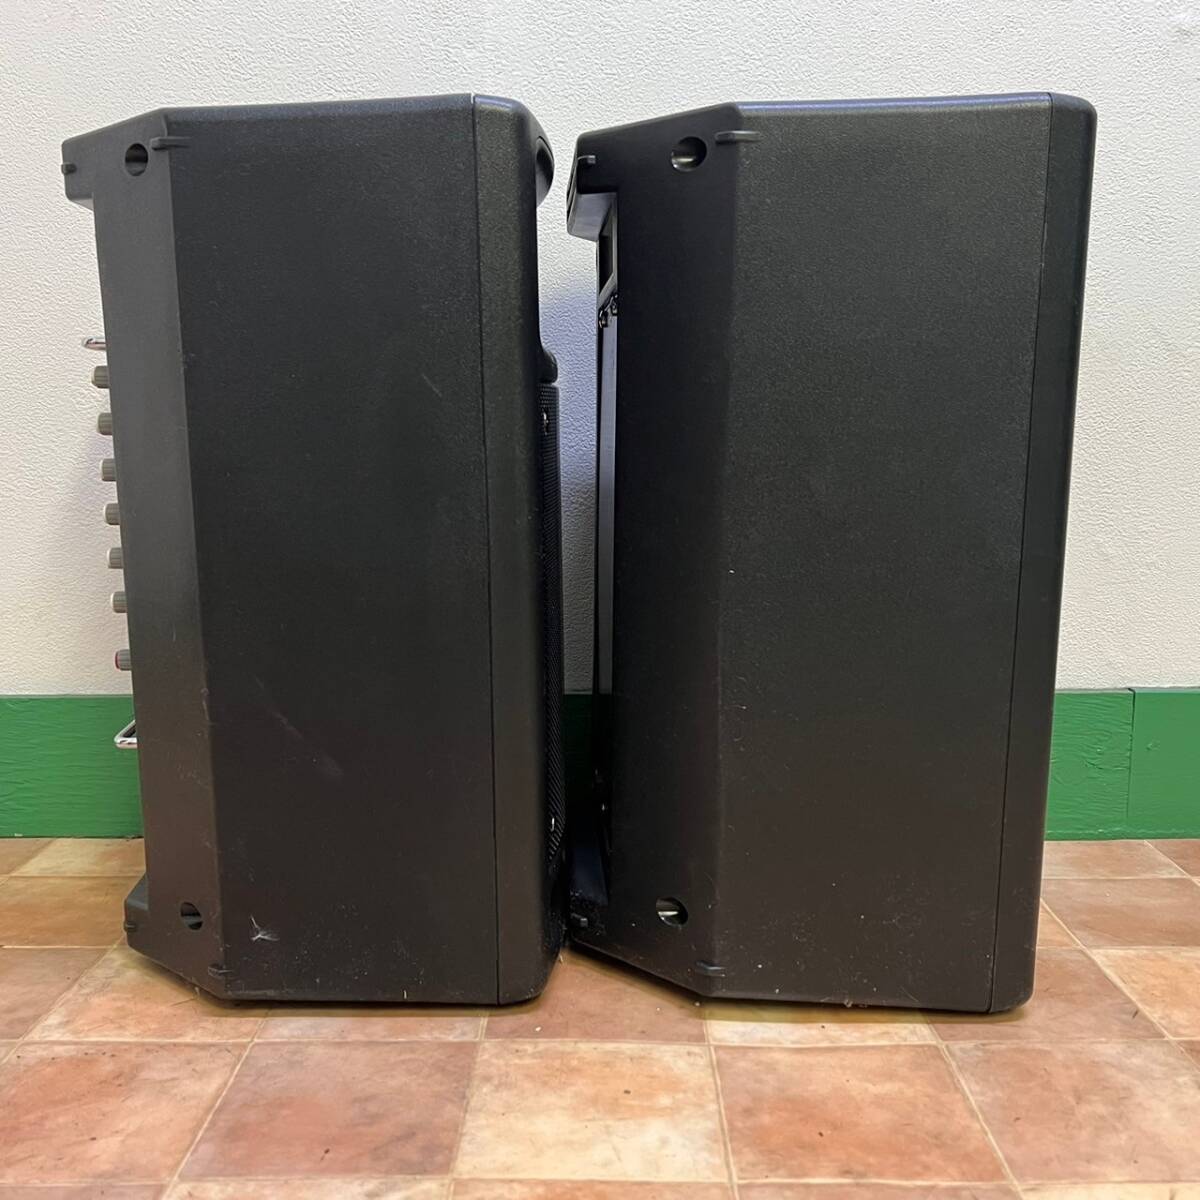 BEg110R 140 YAMAHA STAGEPAS 300 Yamaha stage Pas portable PA system speaker PA equipment sound 